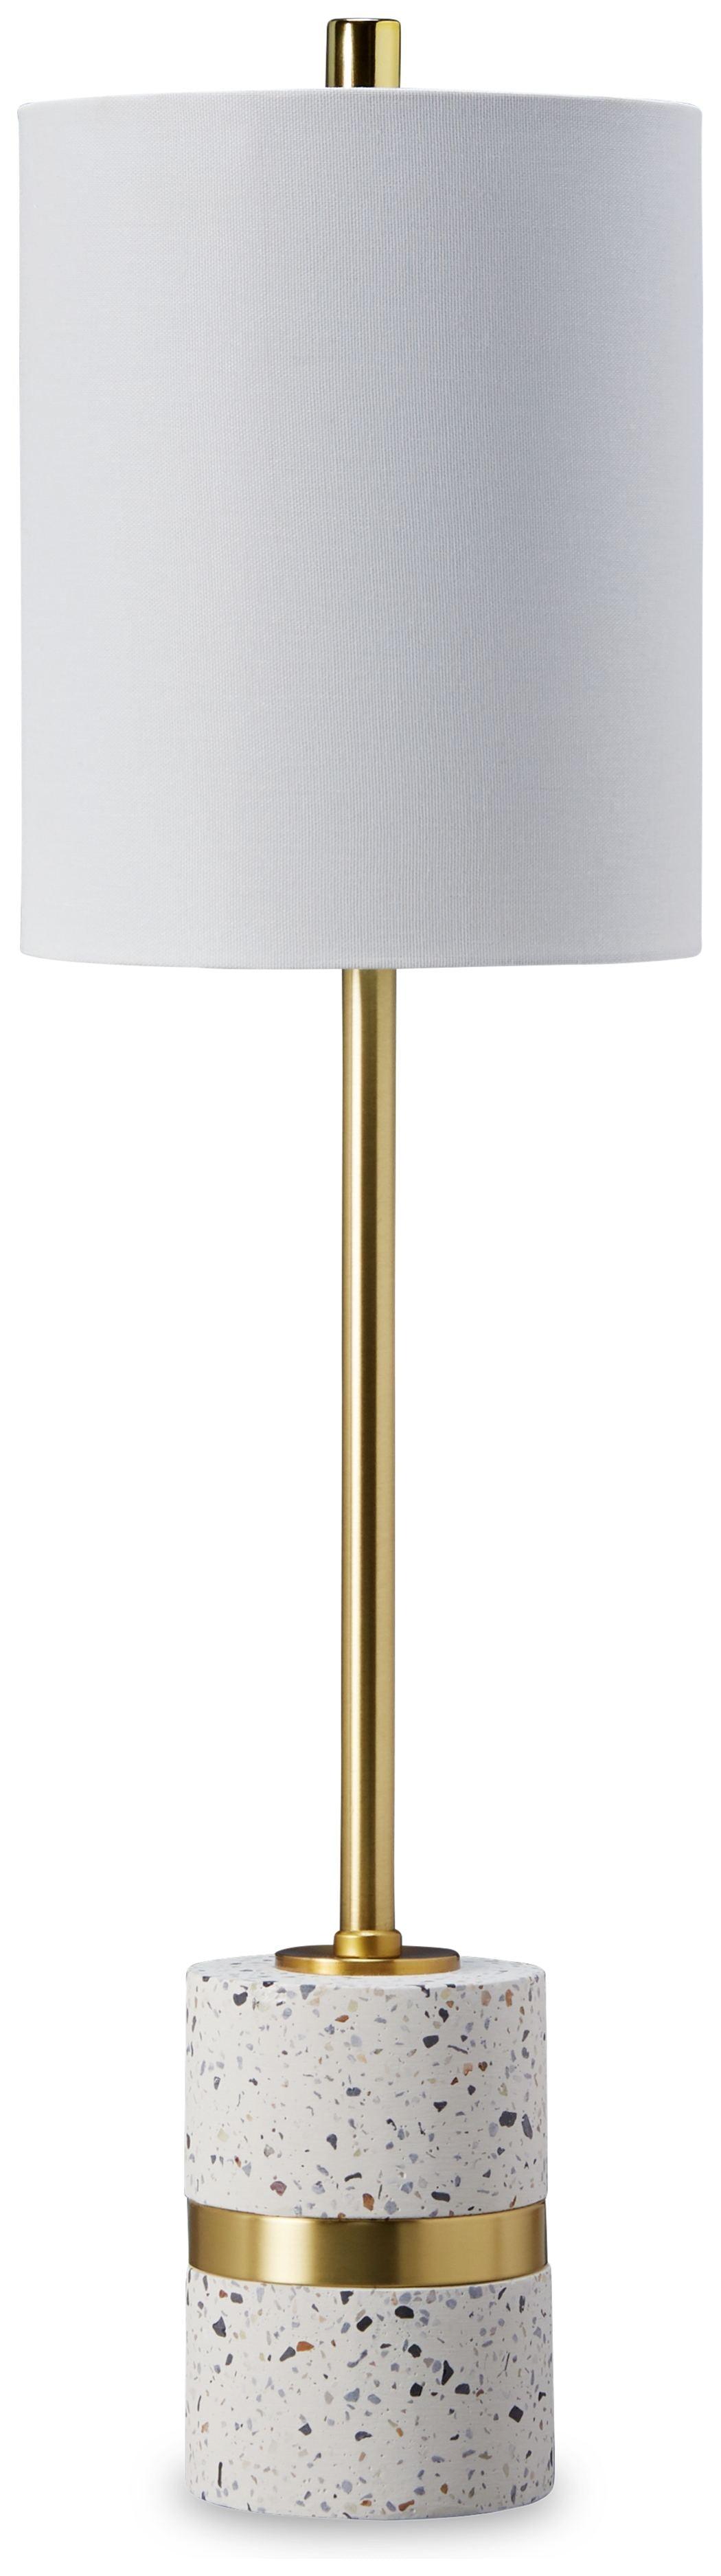 Maywick - White - Metal Table Lamp Tony's Home Furnishings Furniture. Beds. Dressers. Sofas.